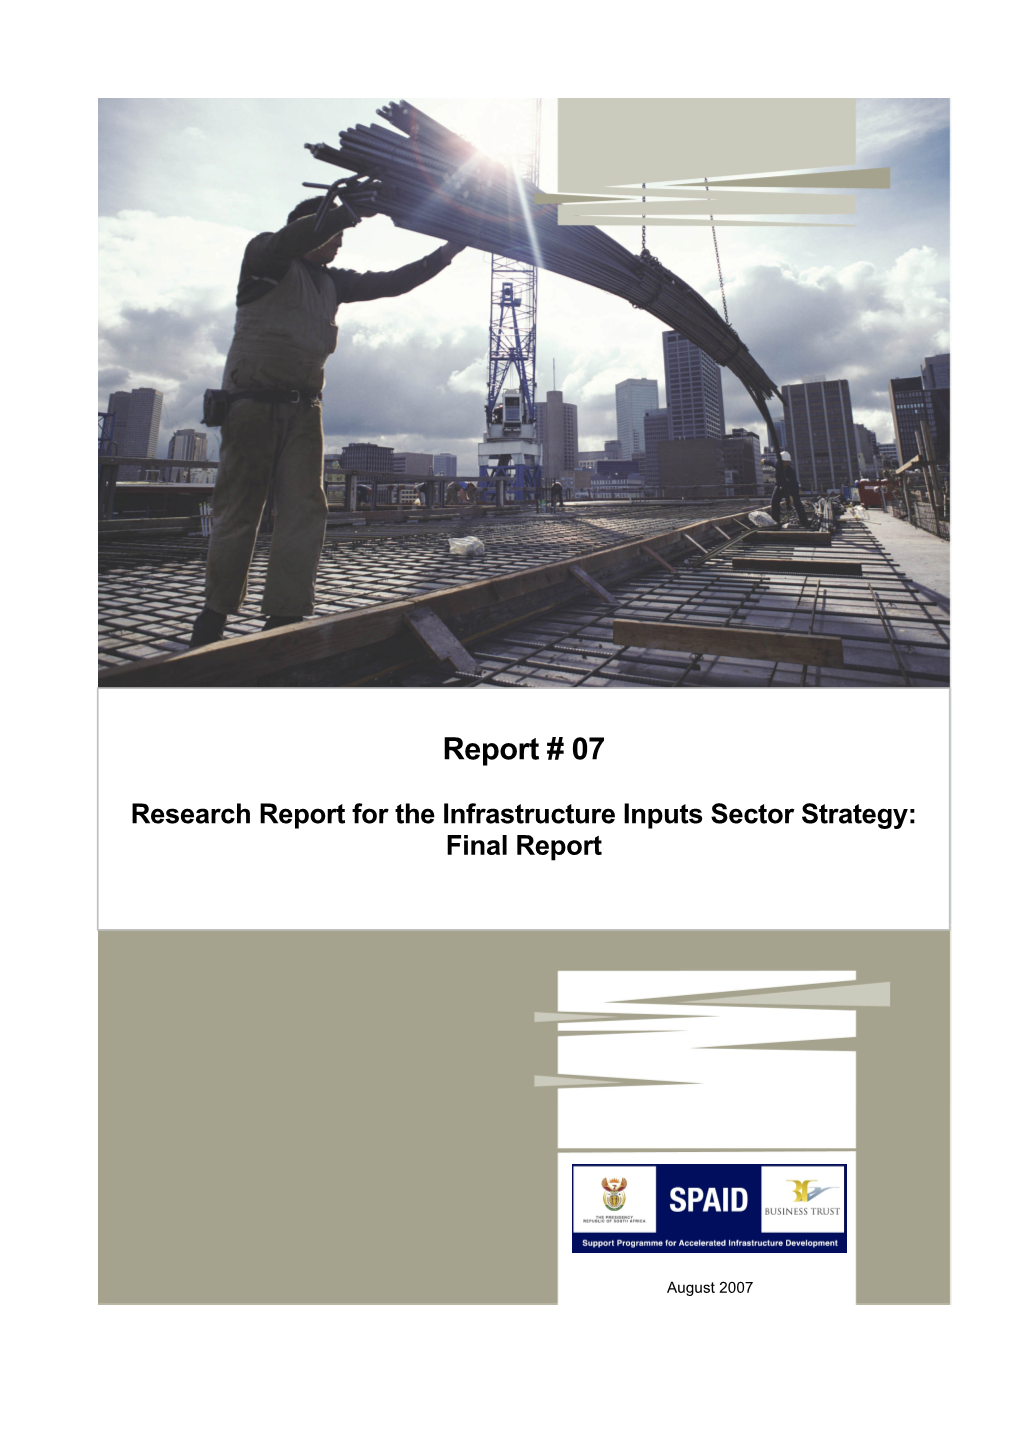 Research Report for the Infrastructure Inputs Sector Strategy: Final Report